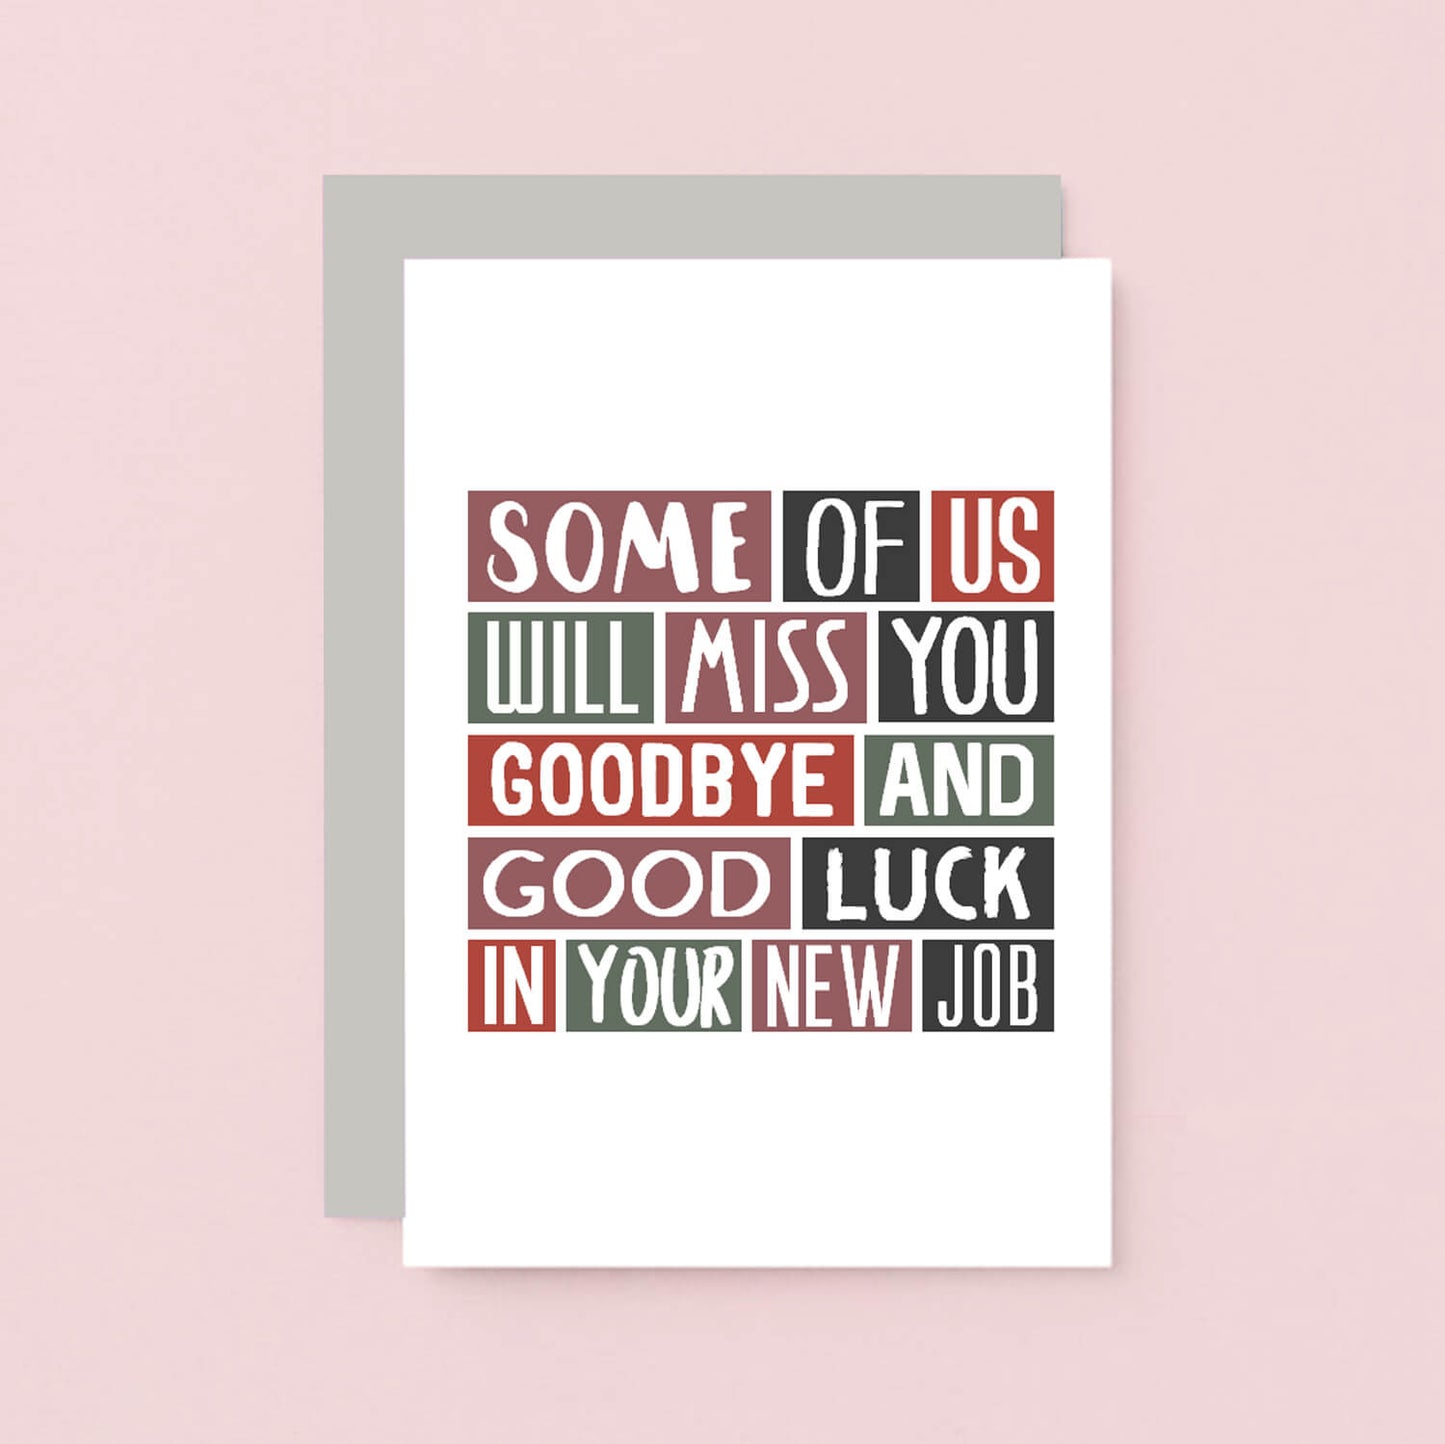 New Job Card by SixElevenCreations. Reads Some of us will miss you. Goodbye and good luck in your new job. Product Code SE0317A6